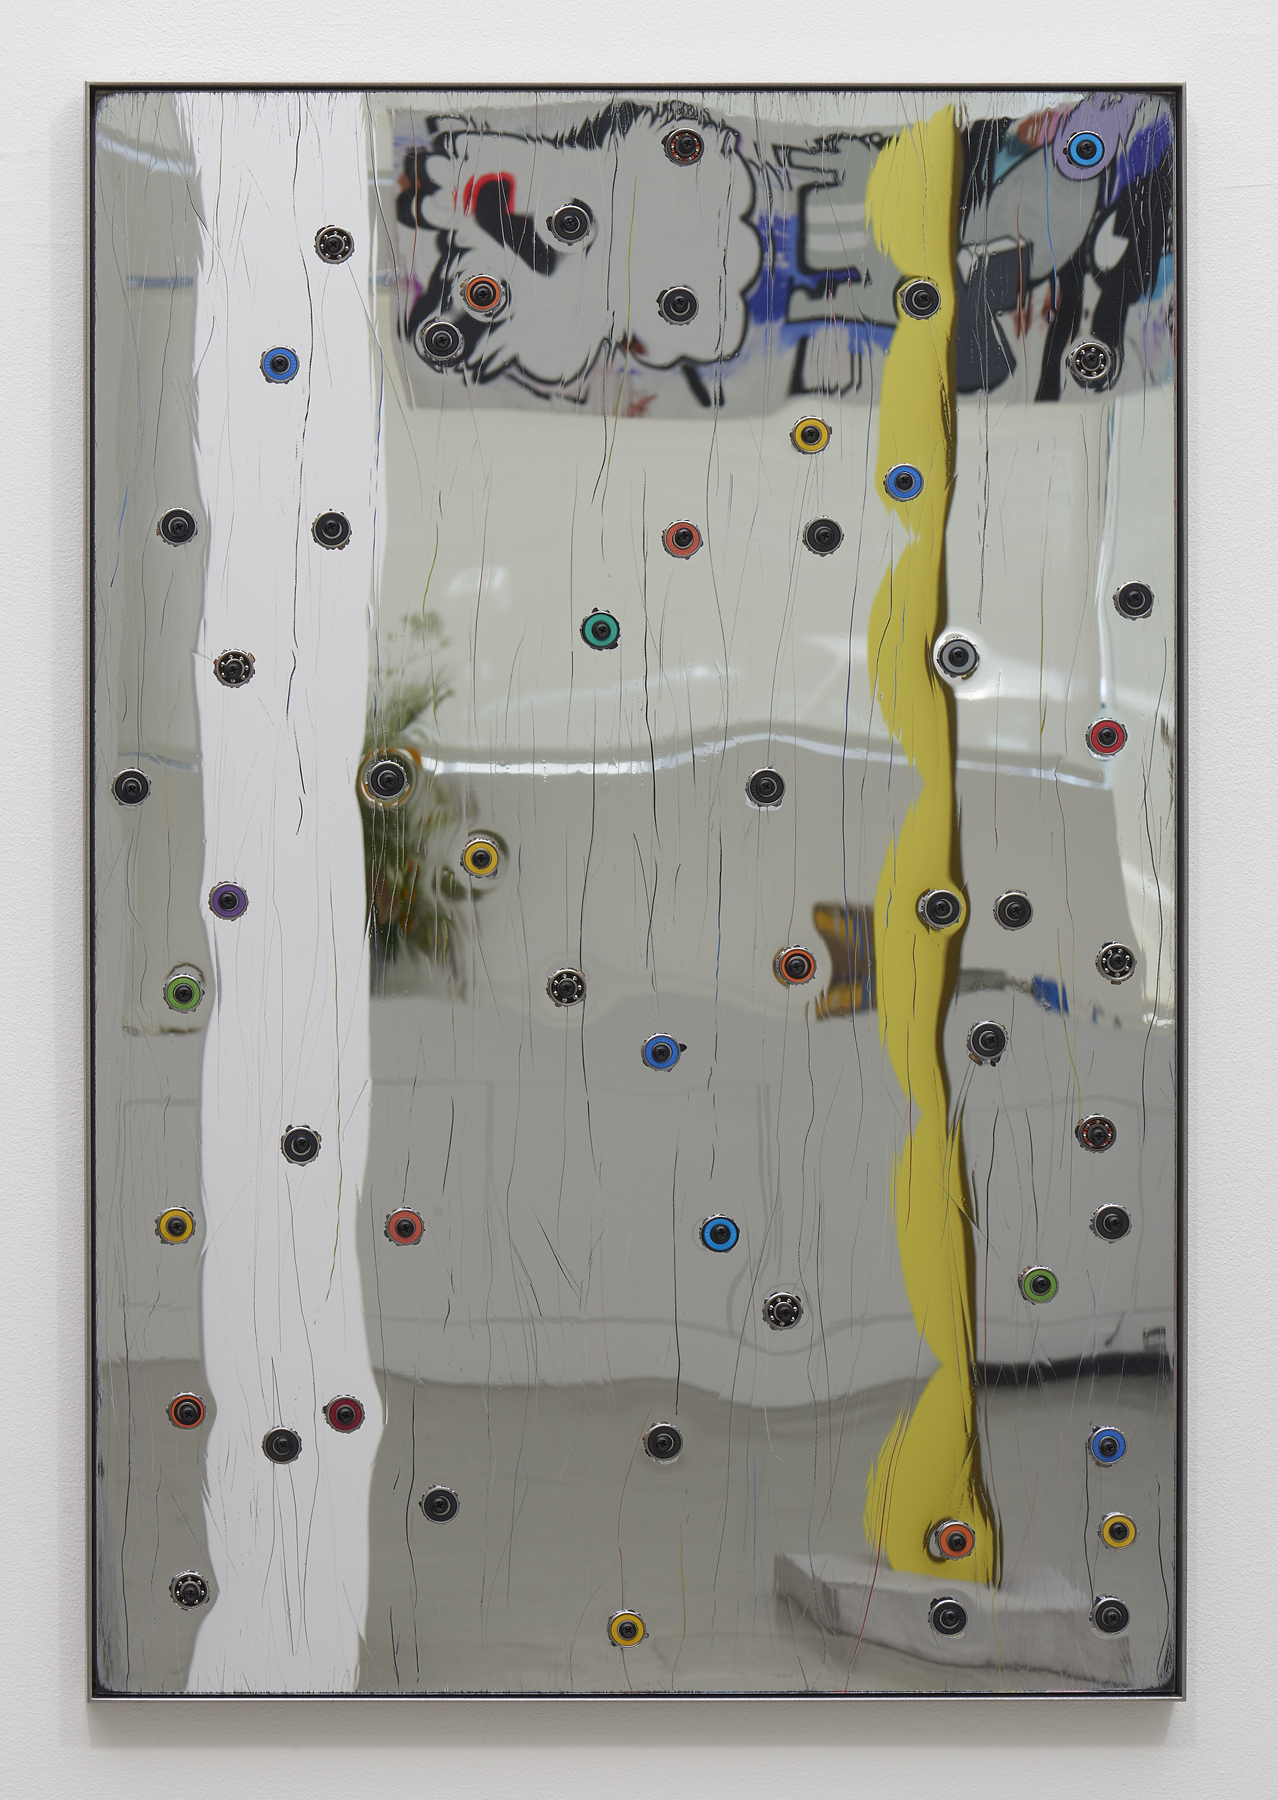  Davina Semo,  "USE THE MIRROR,” SHE TOLD ME, “THE MIRROR IS A TOOL ”, 2018, Acrylic mirror, oriented strand board, assorted ball bearings, hardware, stainless steel, 38 x 25 inches 